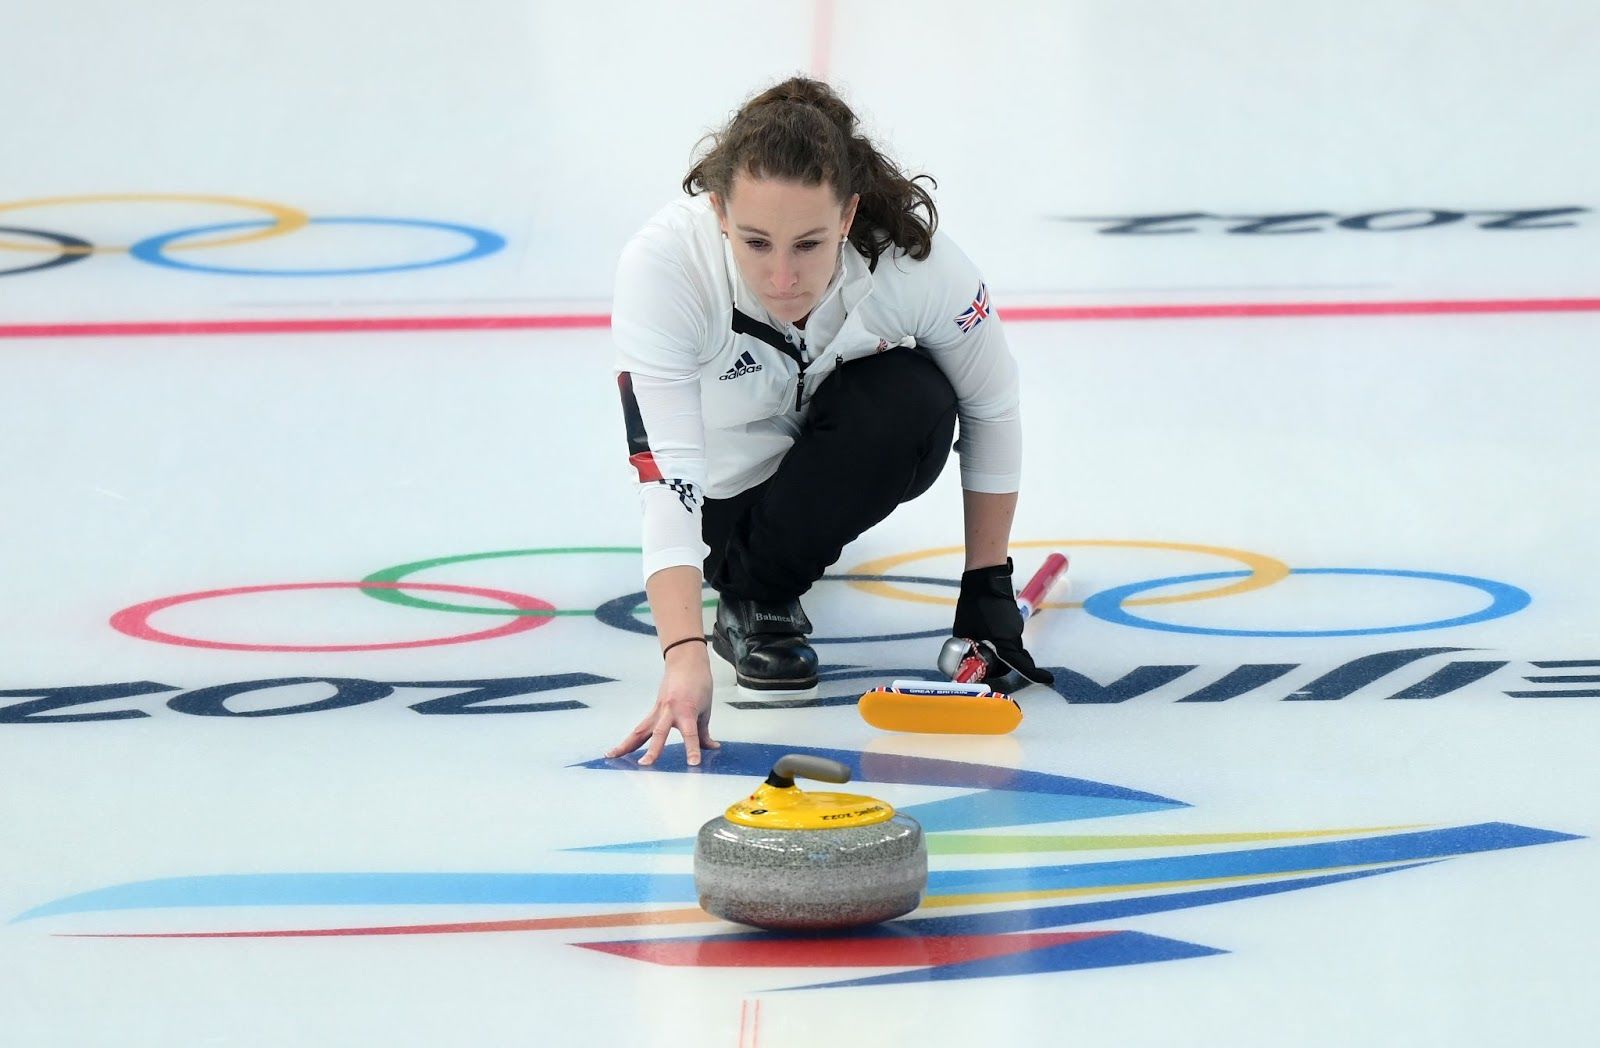 Beijing Winter Olympics: GB claims curling gold as the Winter Olympics come to close